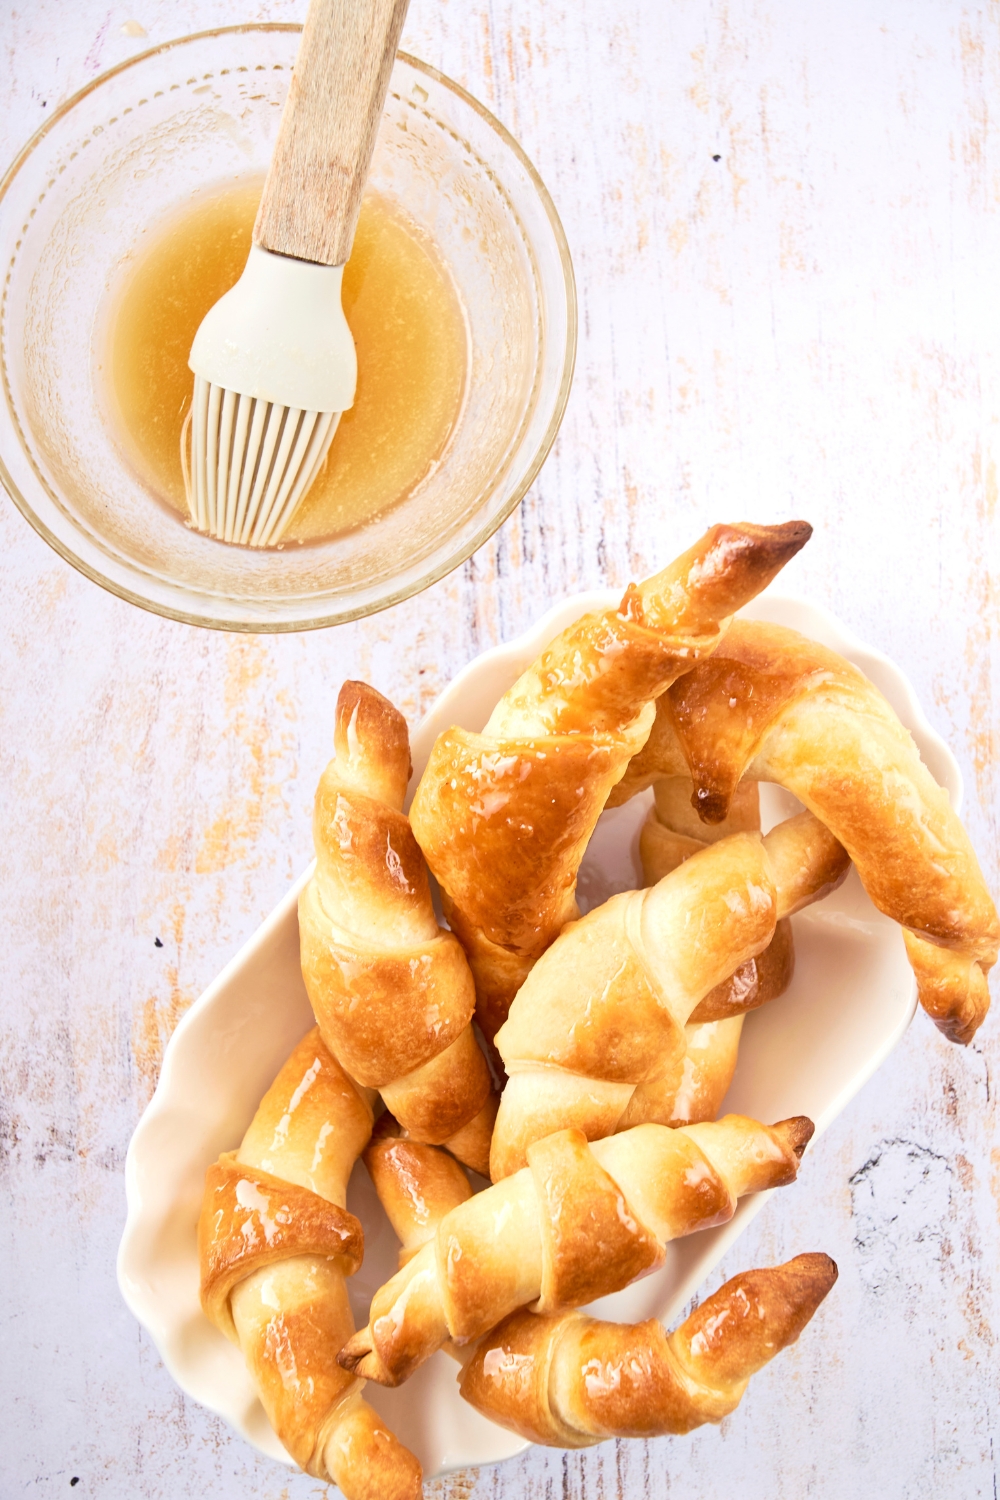 A serving dish is piled high with golden brown Cheddar's croissants.